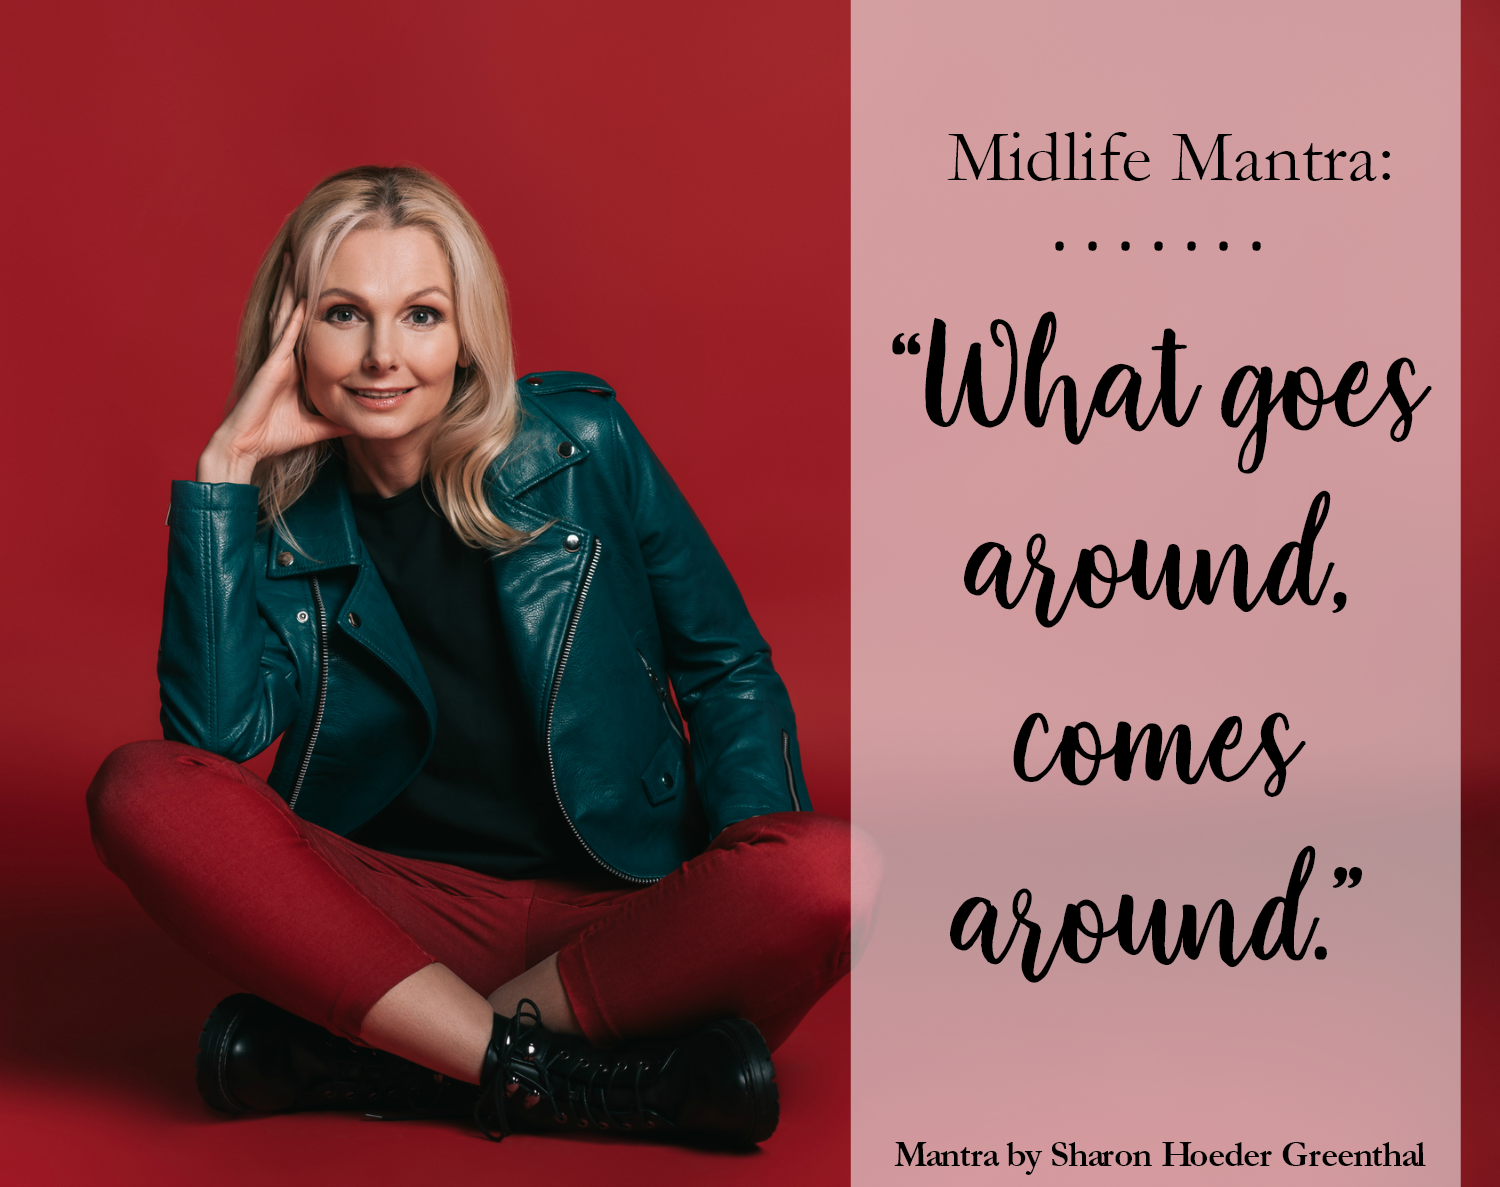 Midlife Mantra: What Goes Around, Comes Around